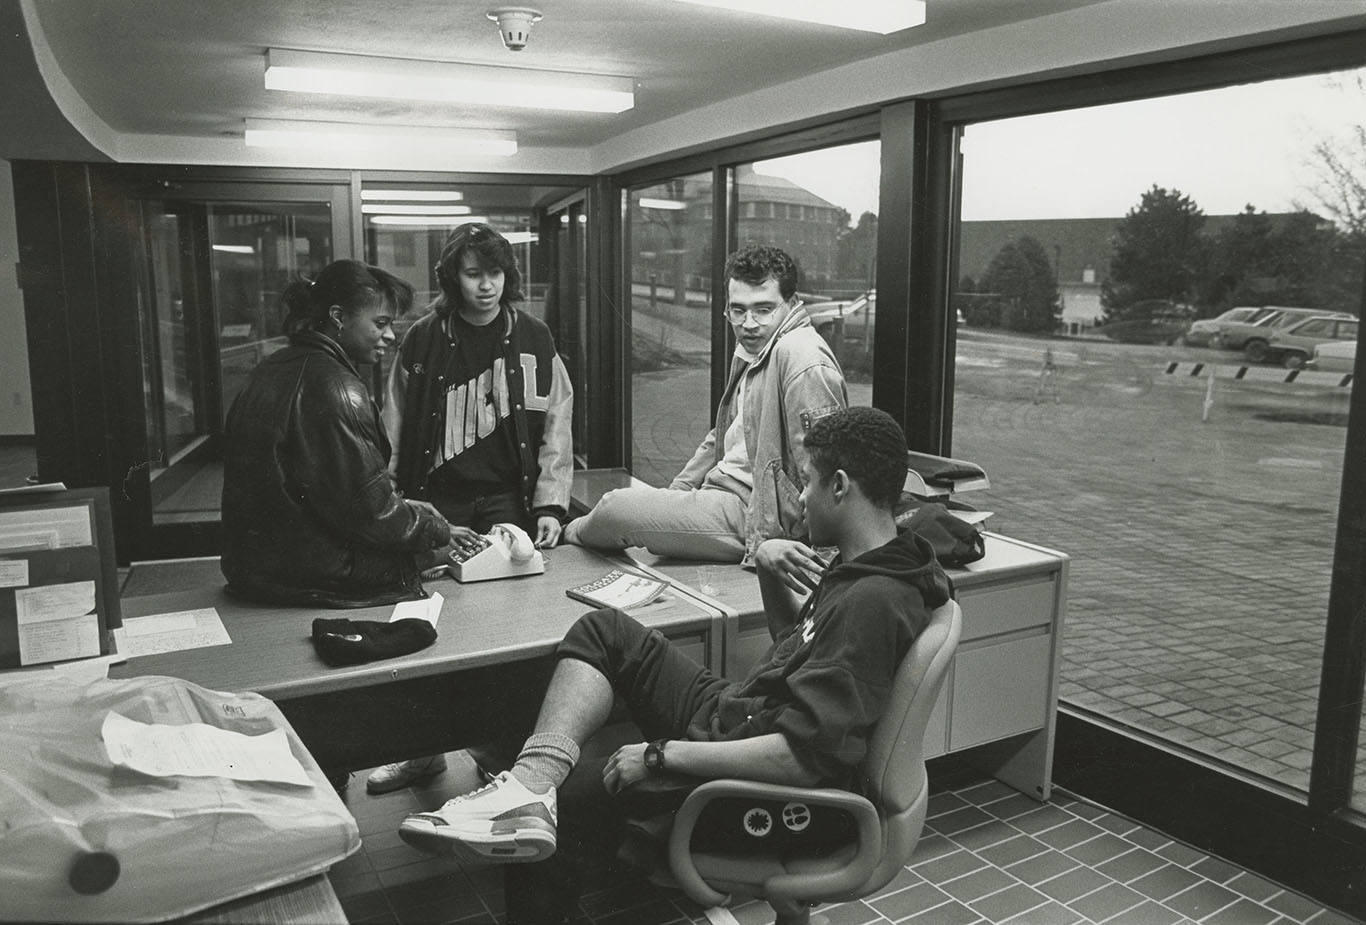 Students enjoy the new cultural center, 1989